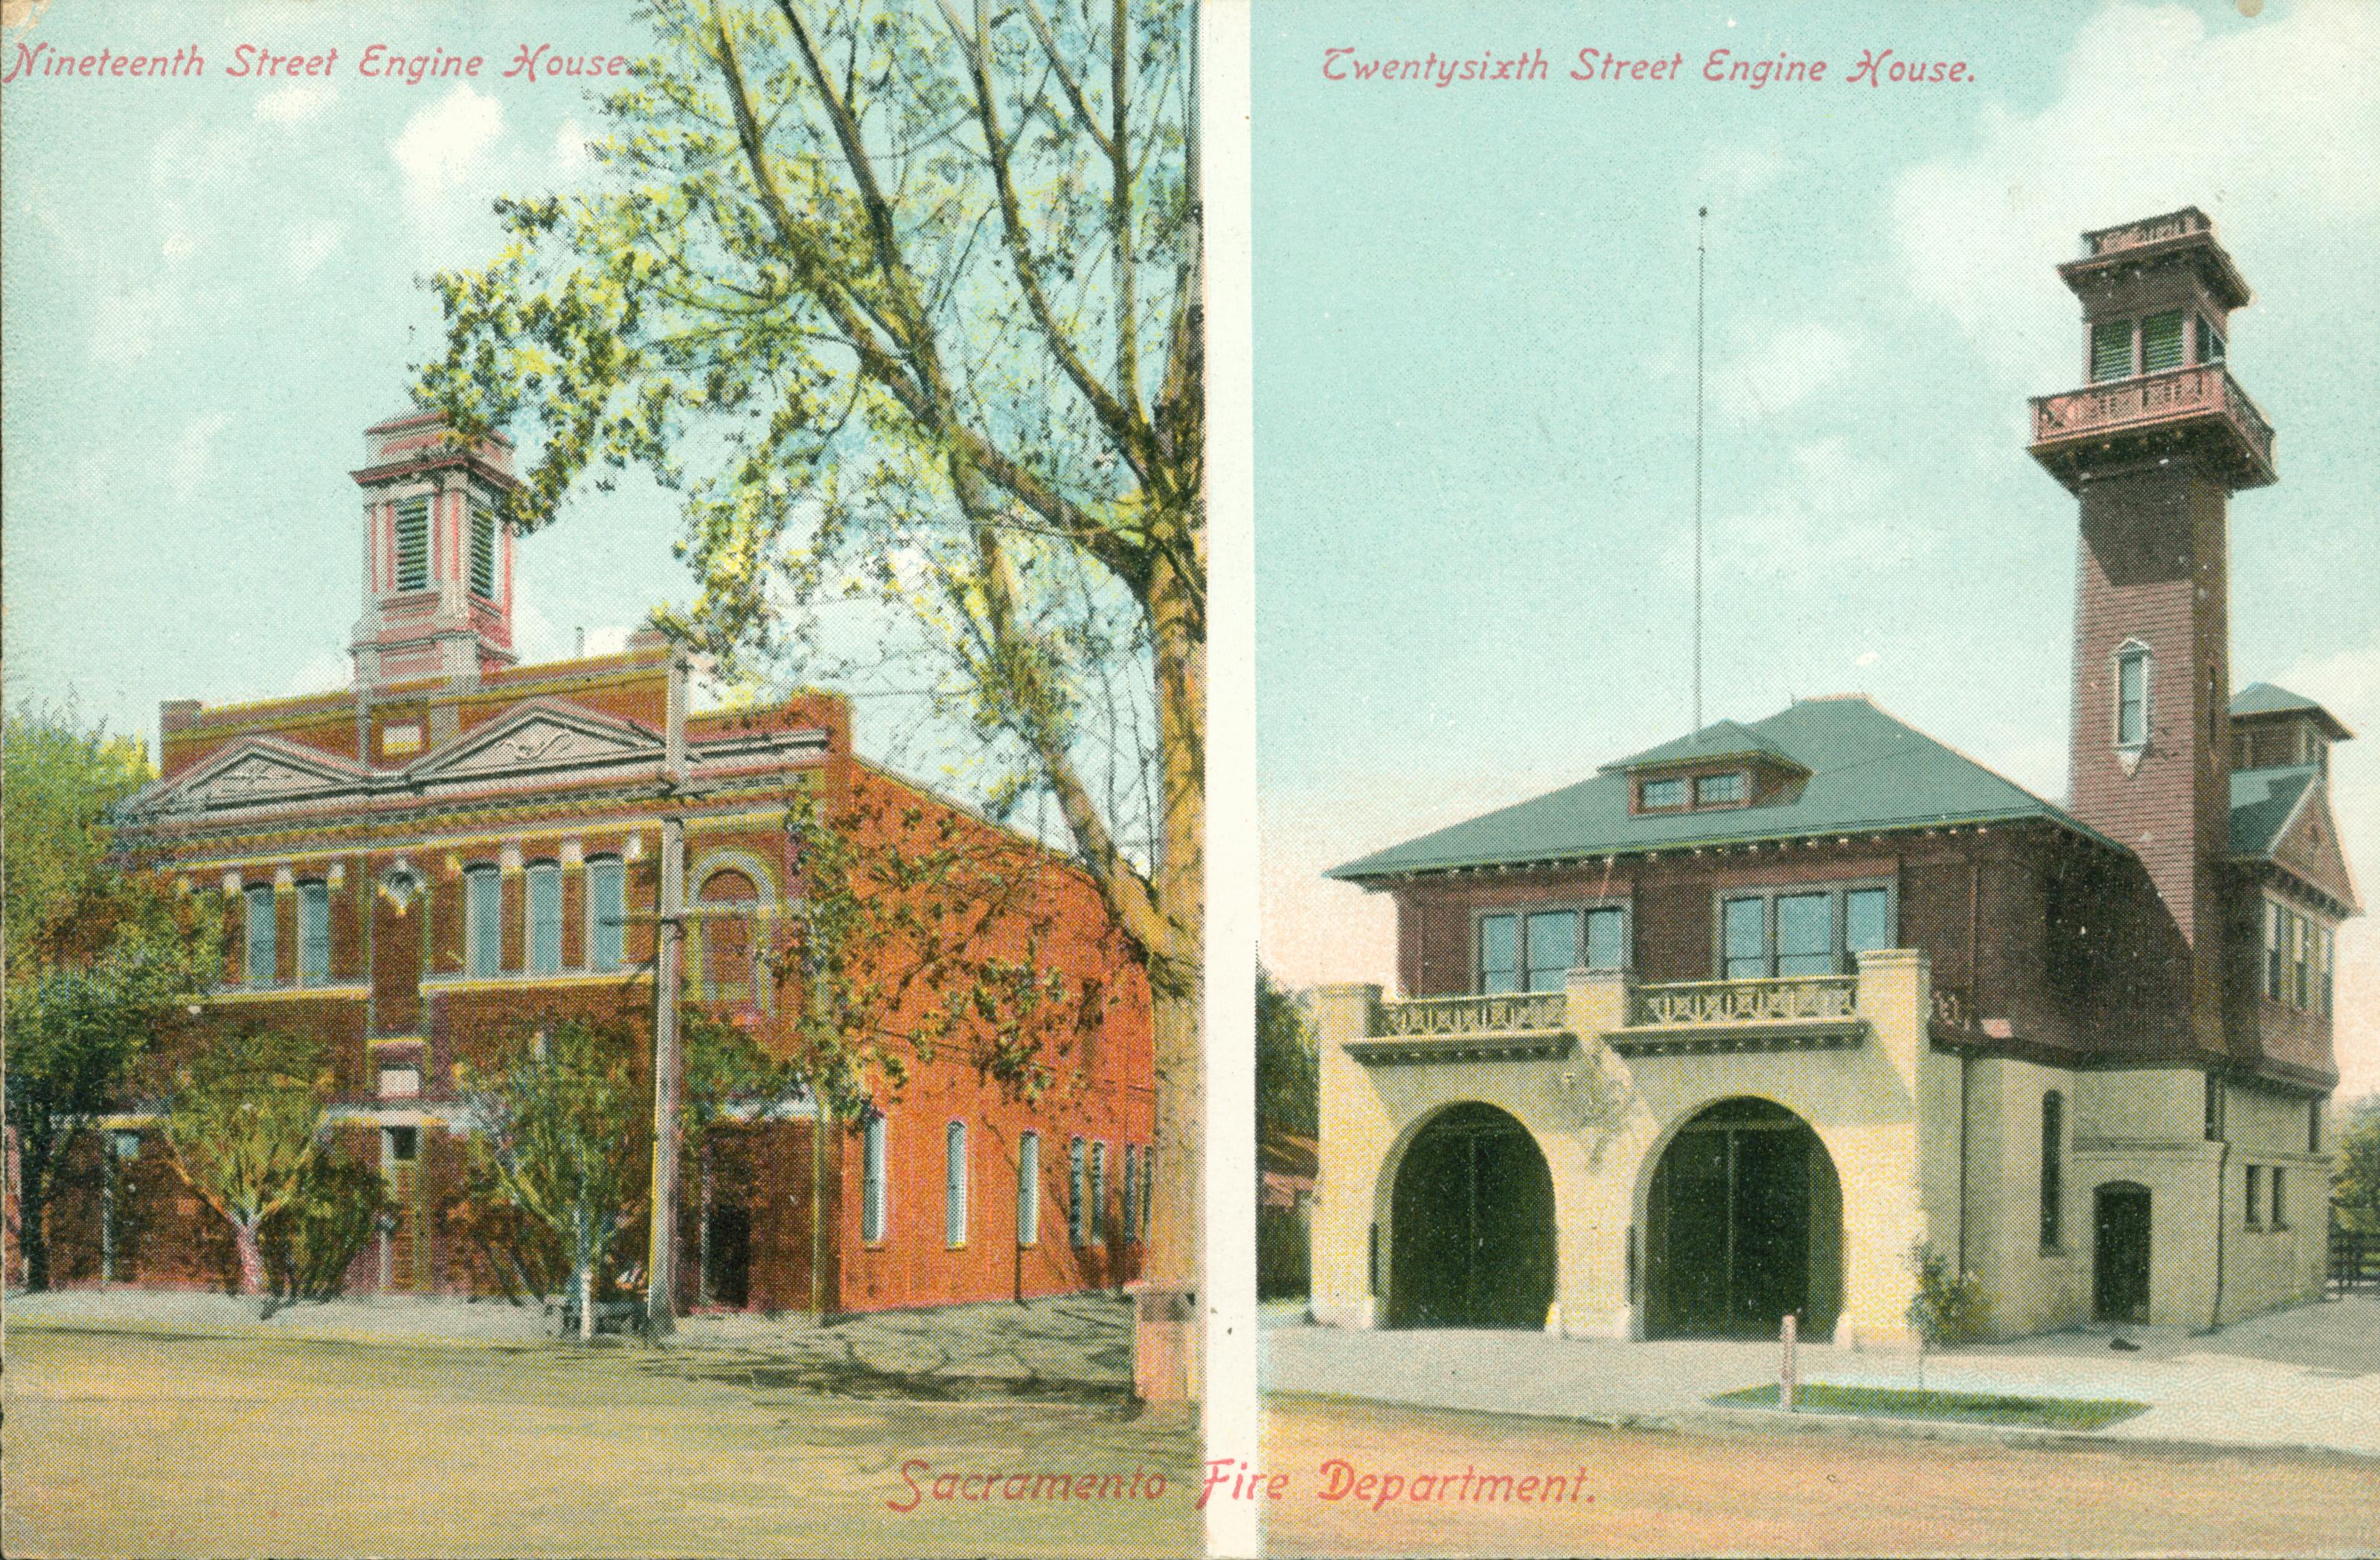 This postcard shows a view of the 15th street fire station on the left and the 26th street fire station on the right.